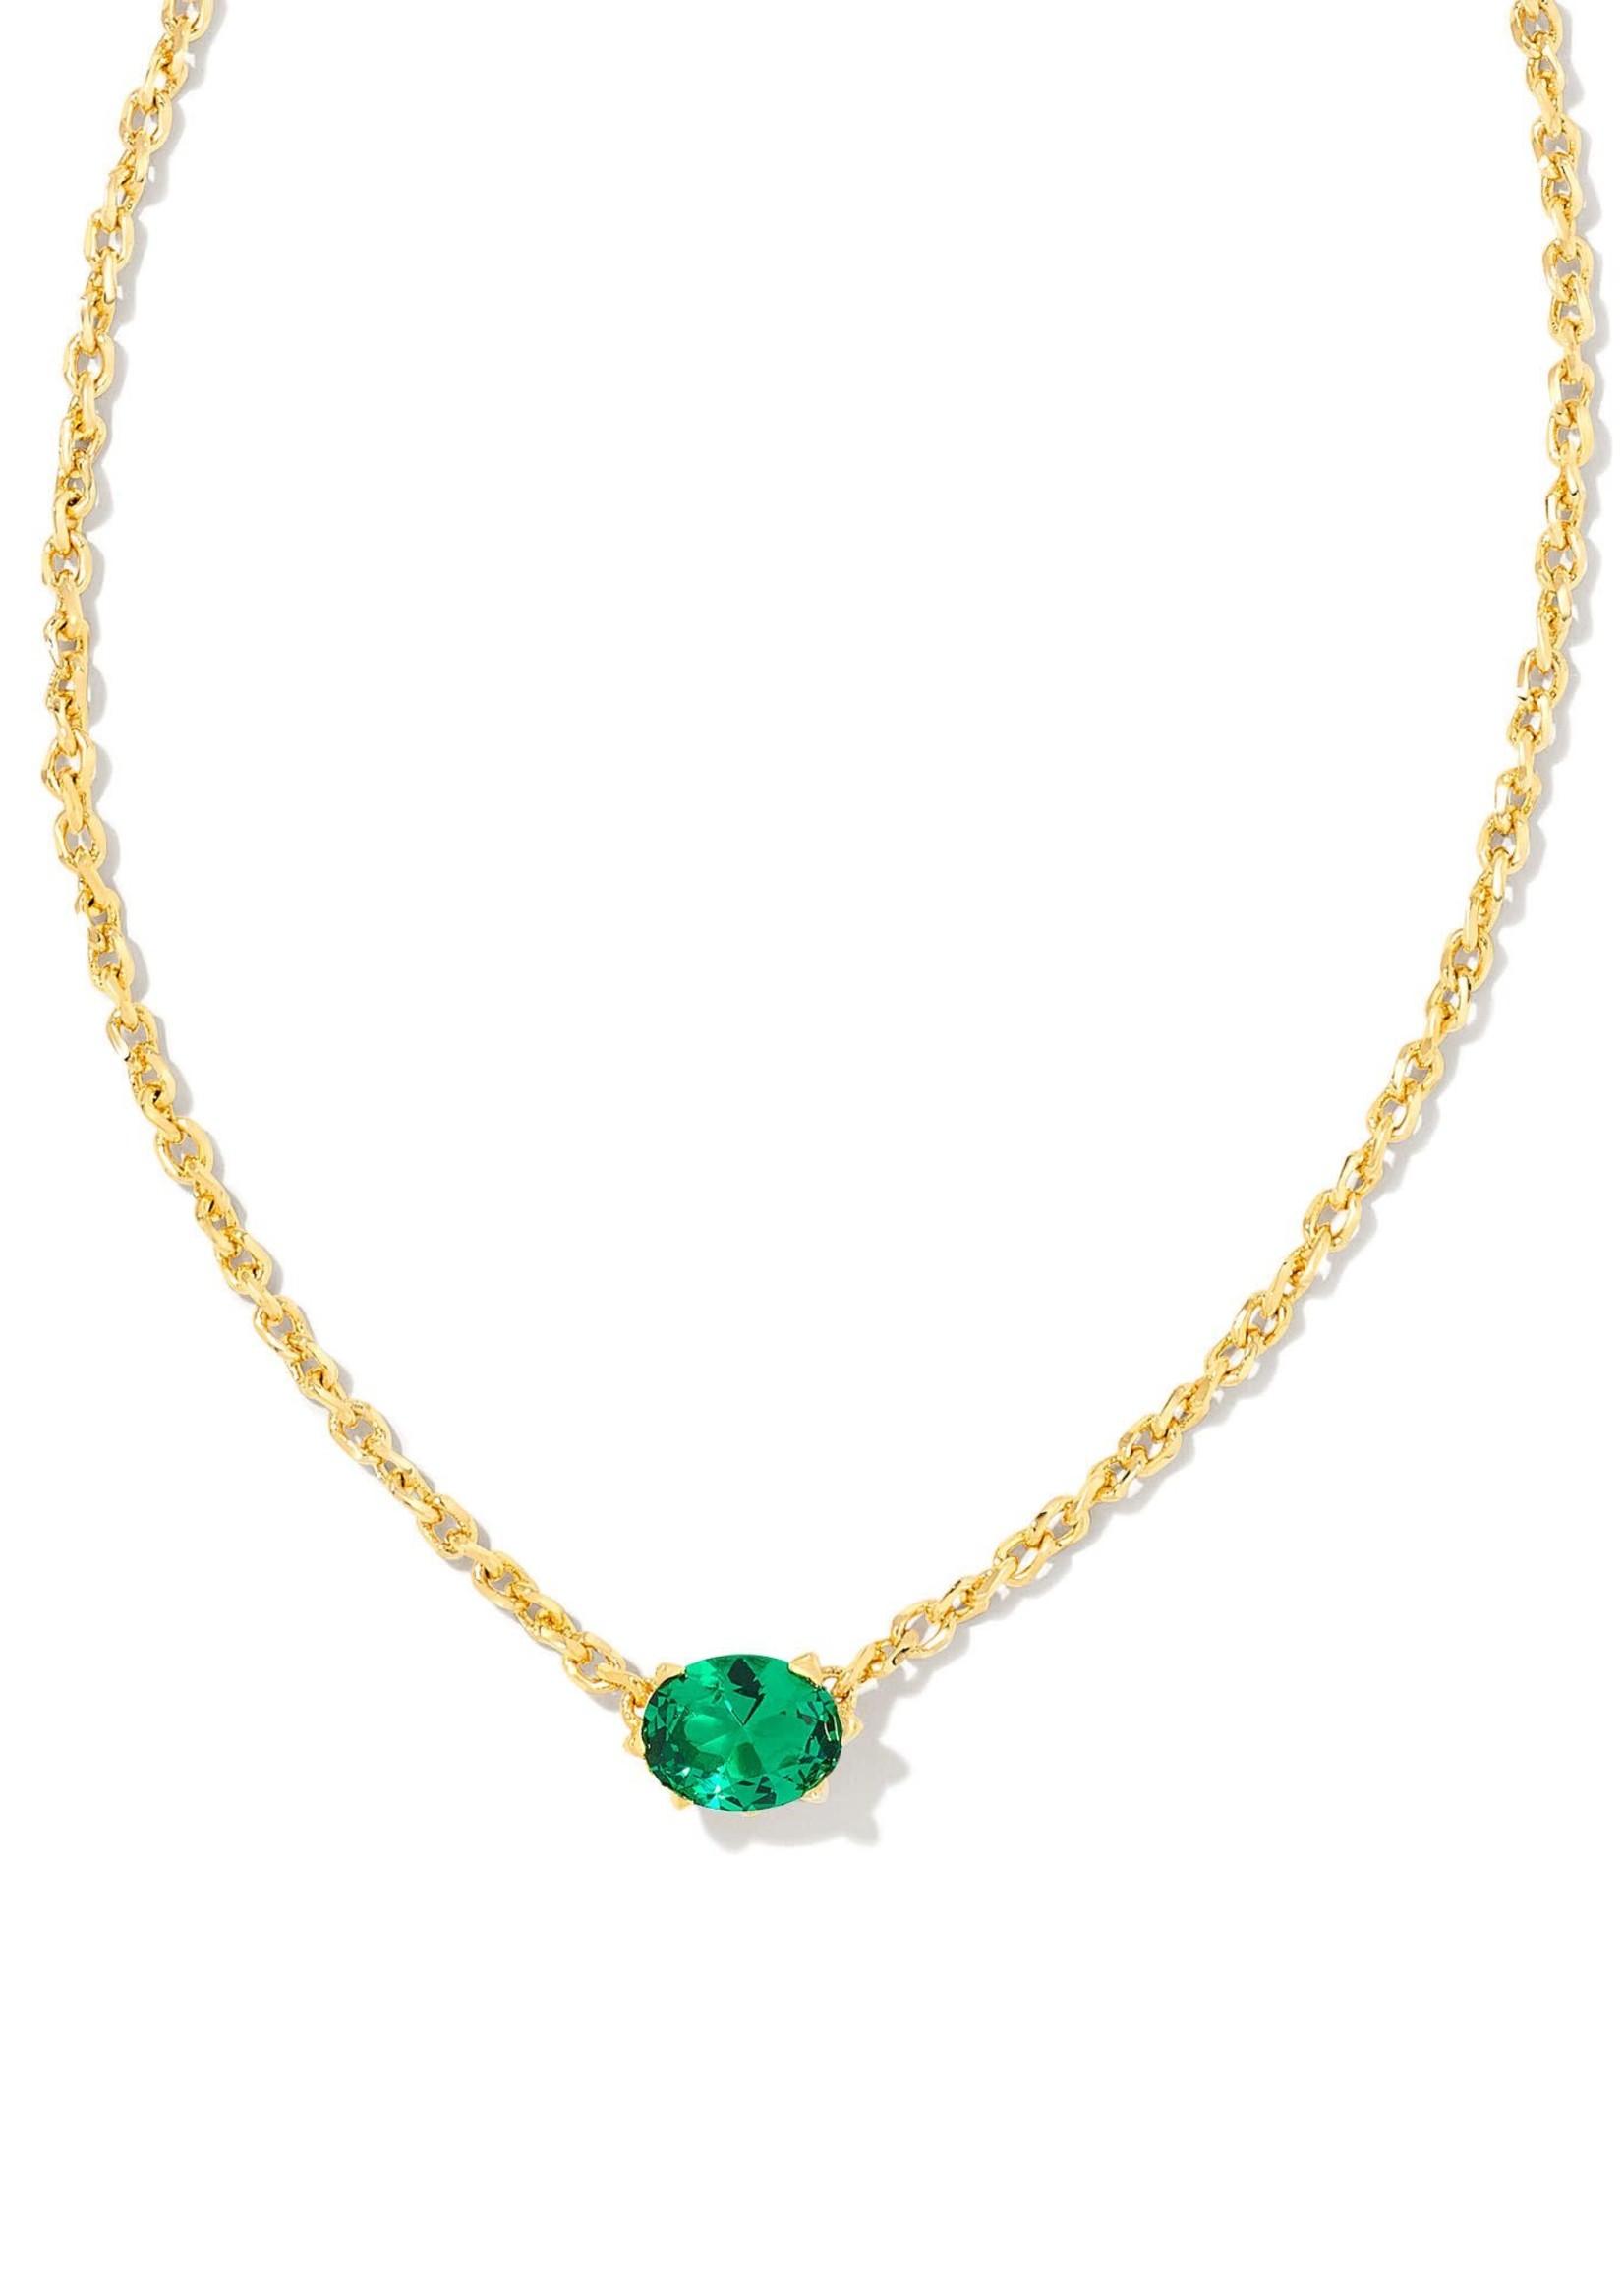 Kendra Scott CAILIN CRYSTAL PENDANT NECKLACE GOLD GREEN CRYSTAL